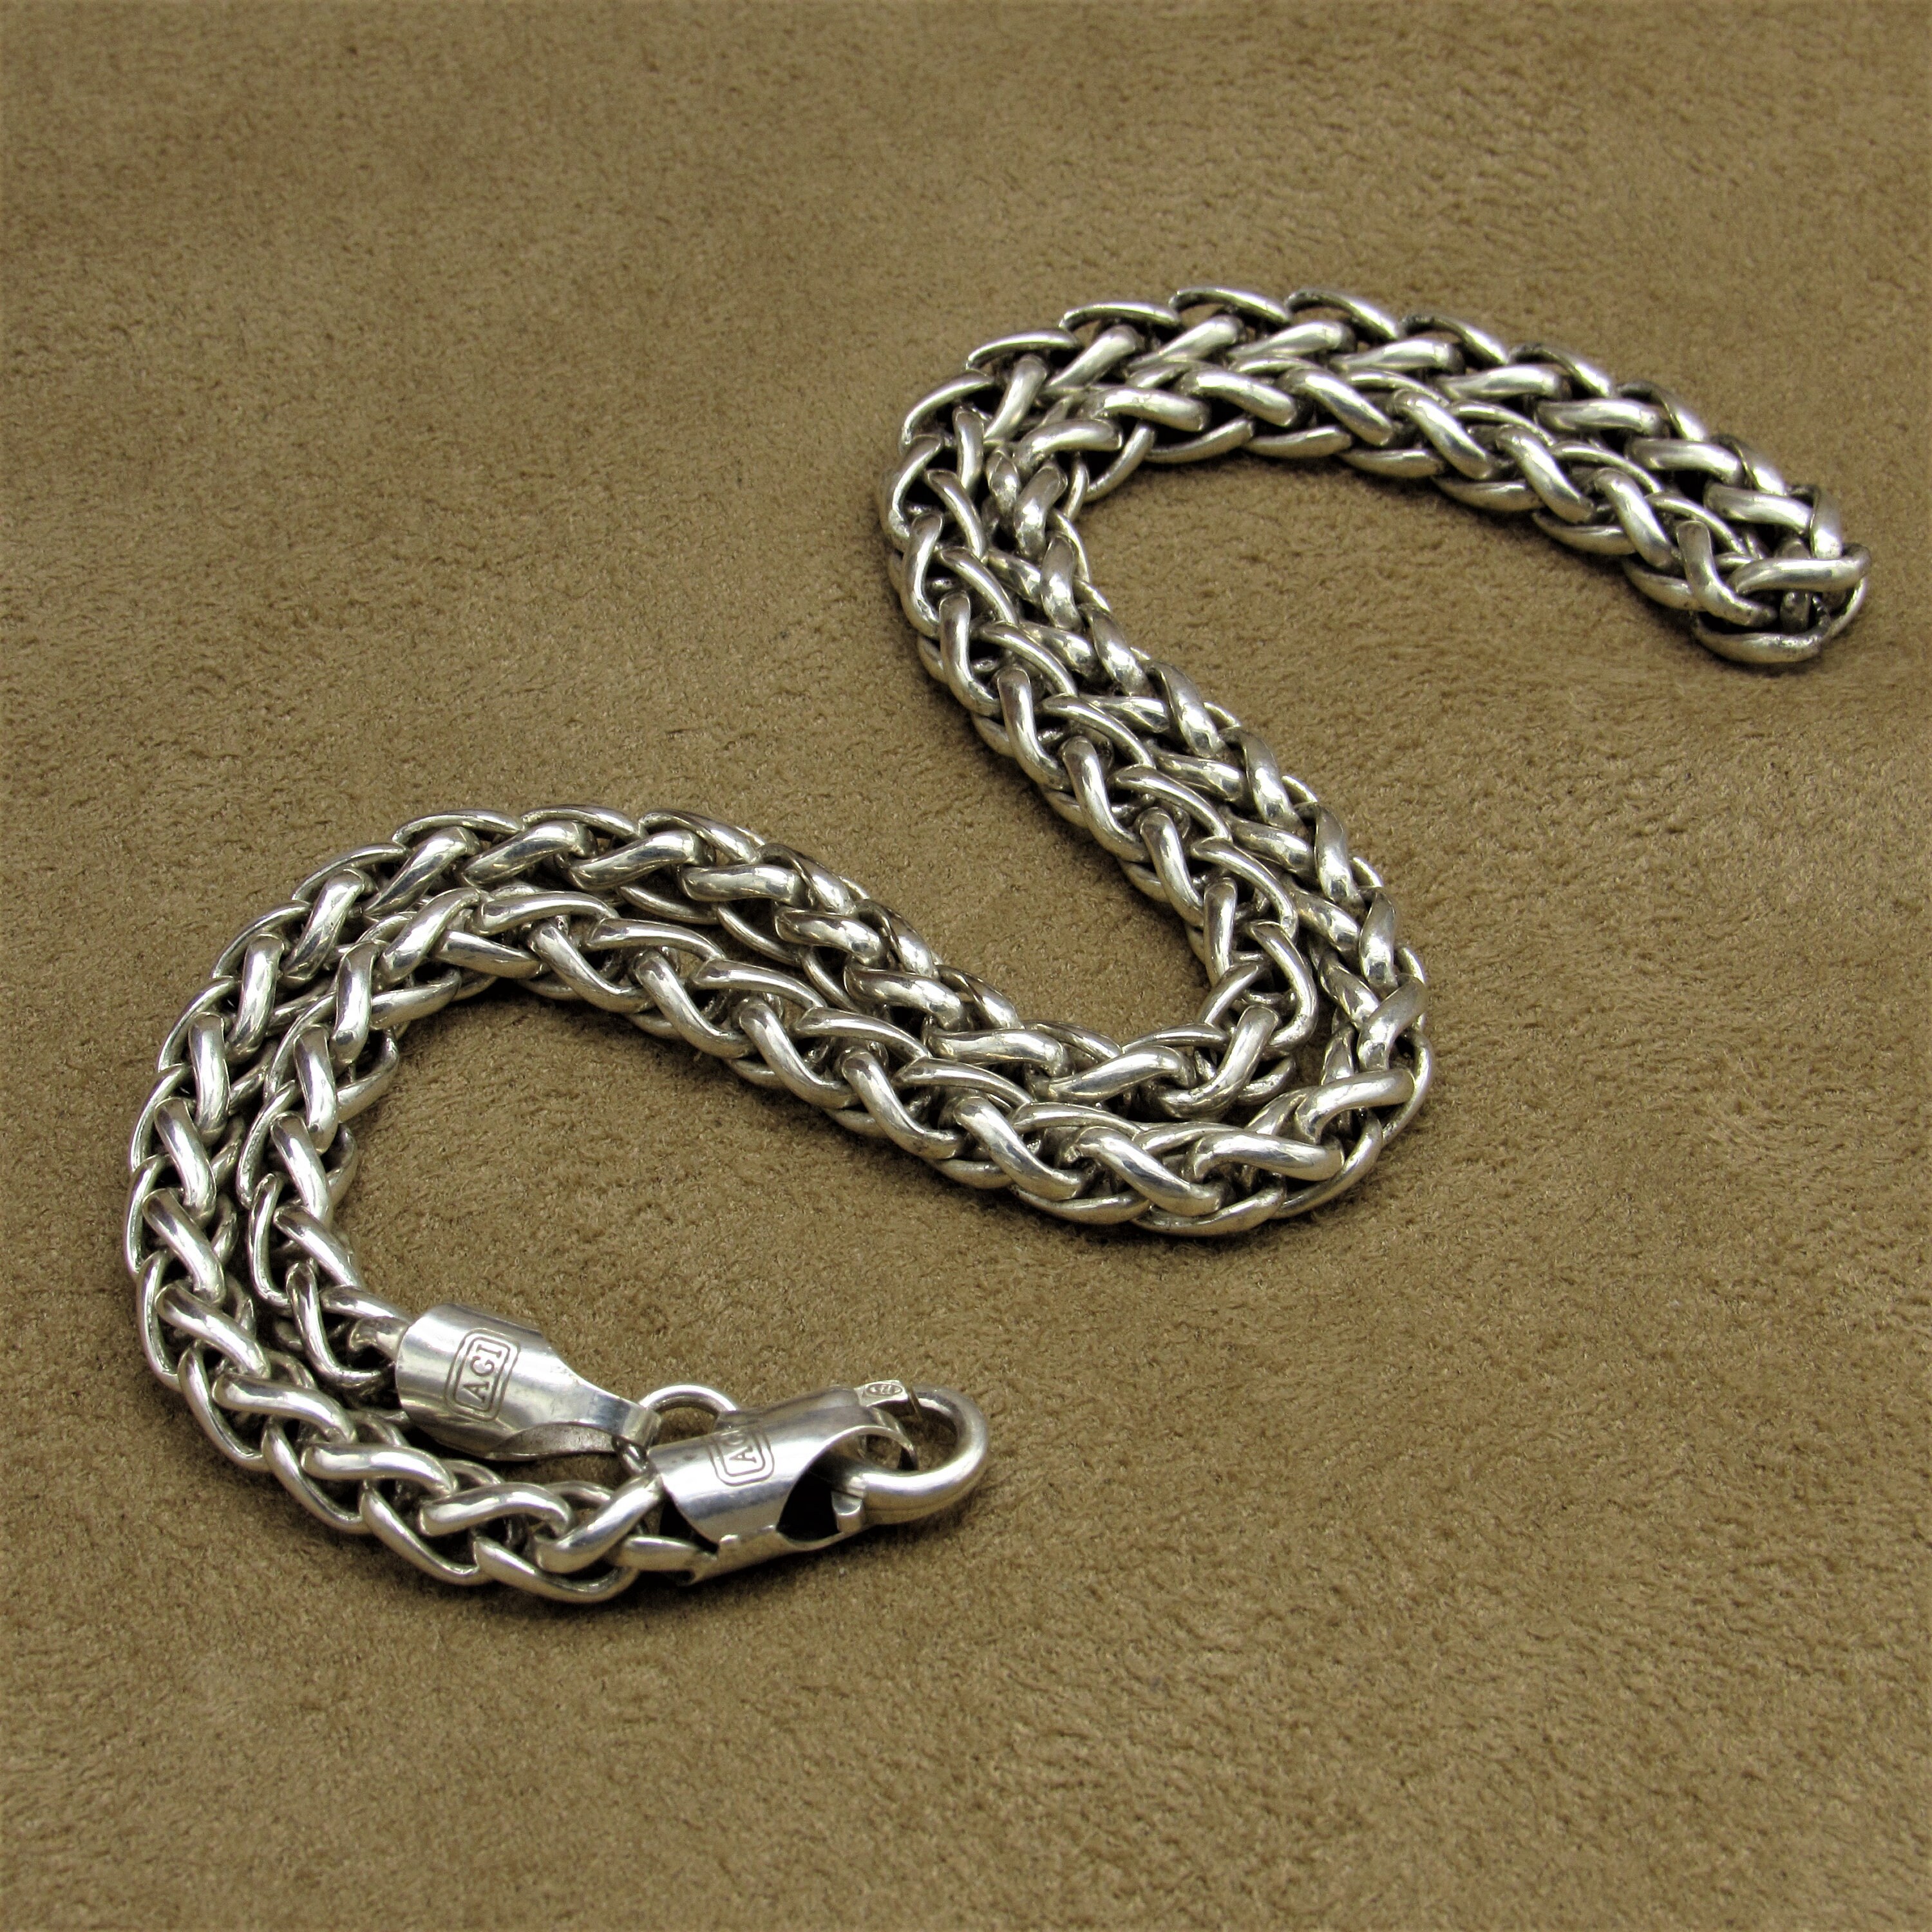 Silver Chain Necklace - Wheat 5mm 50cm